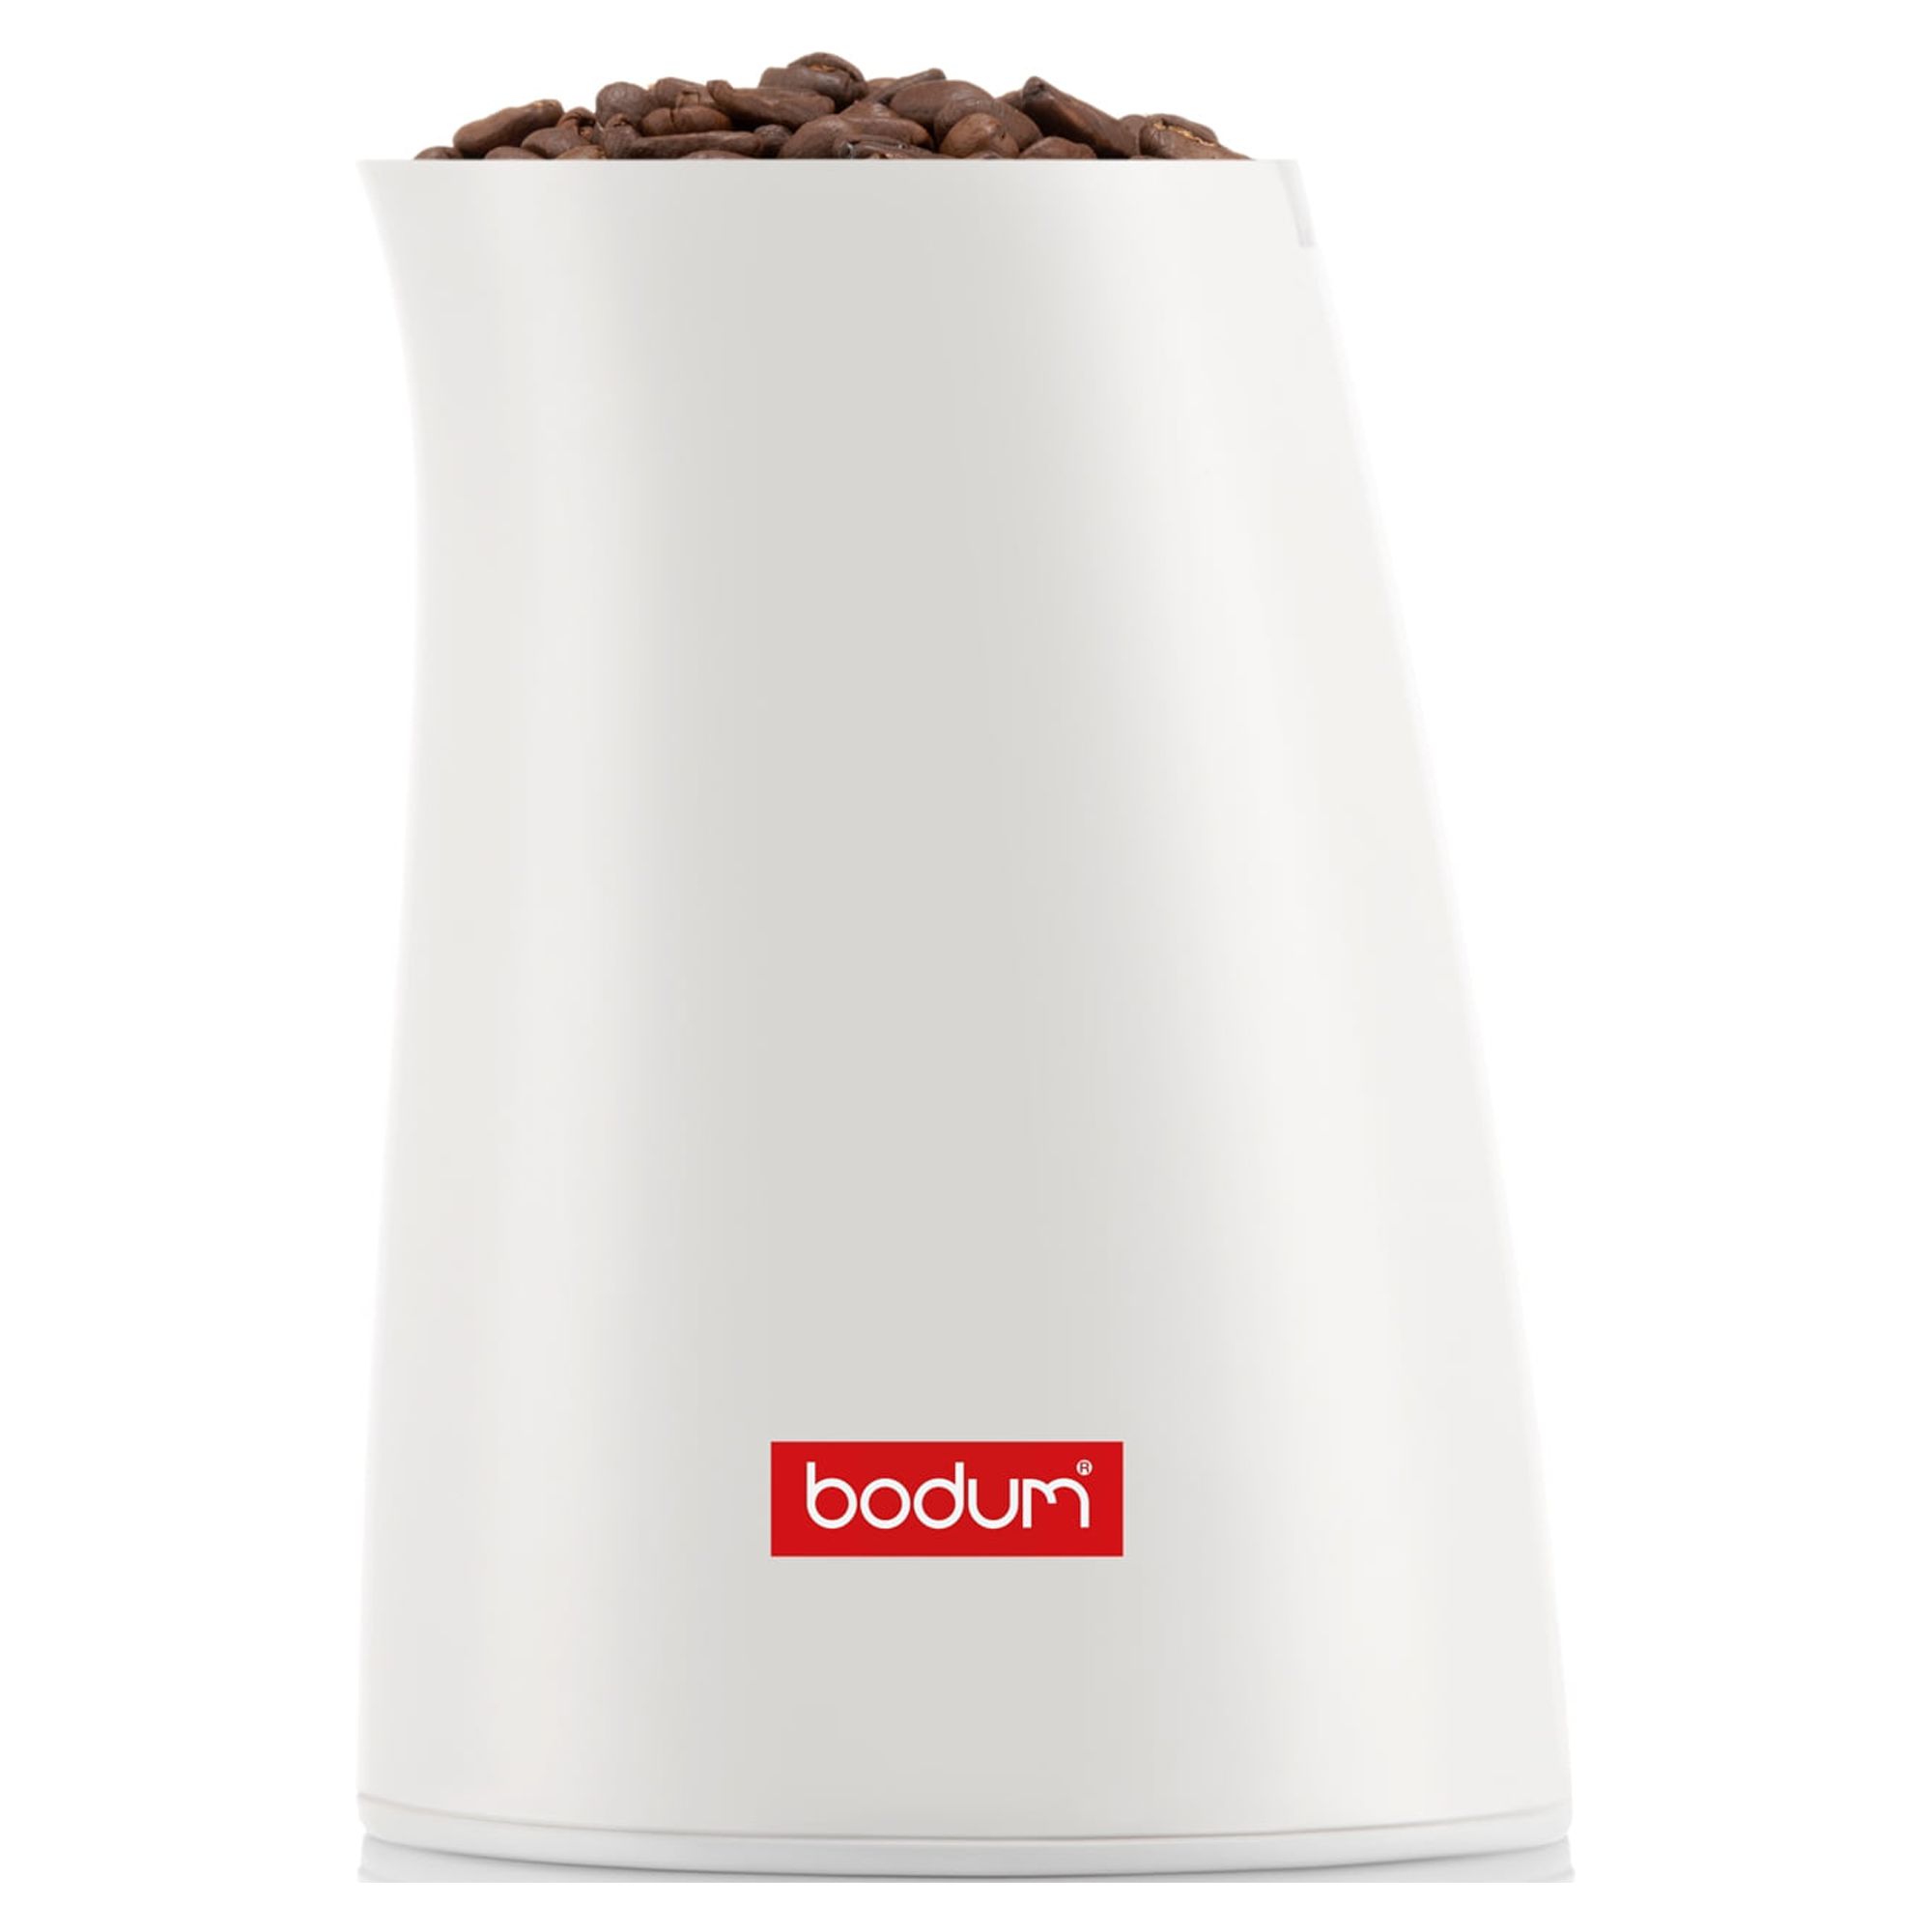 Bodum C-Mill Electric Coffee Grinder, White, New - image 5 of 9